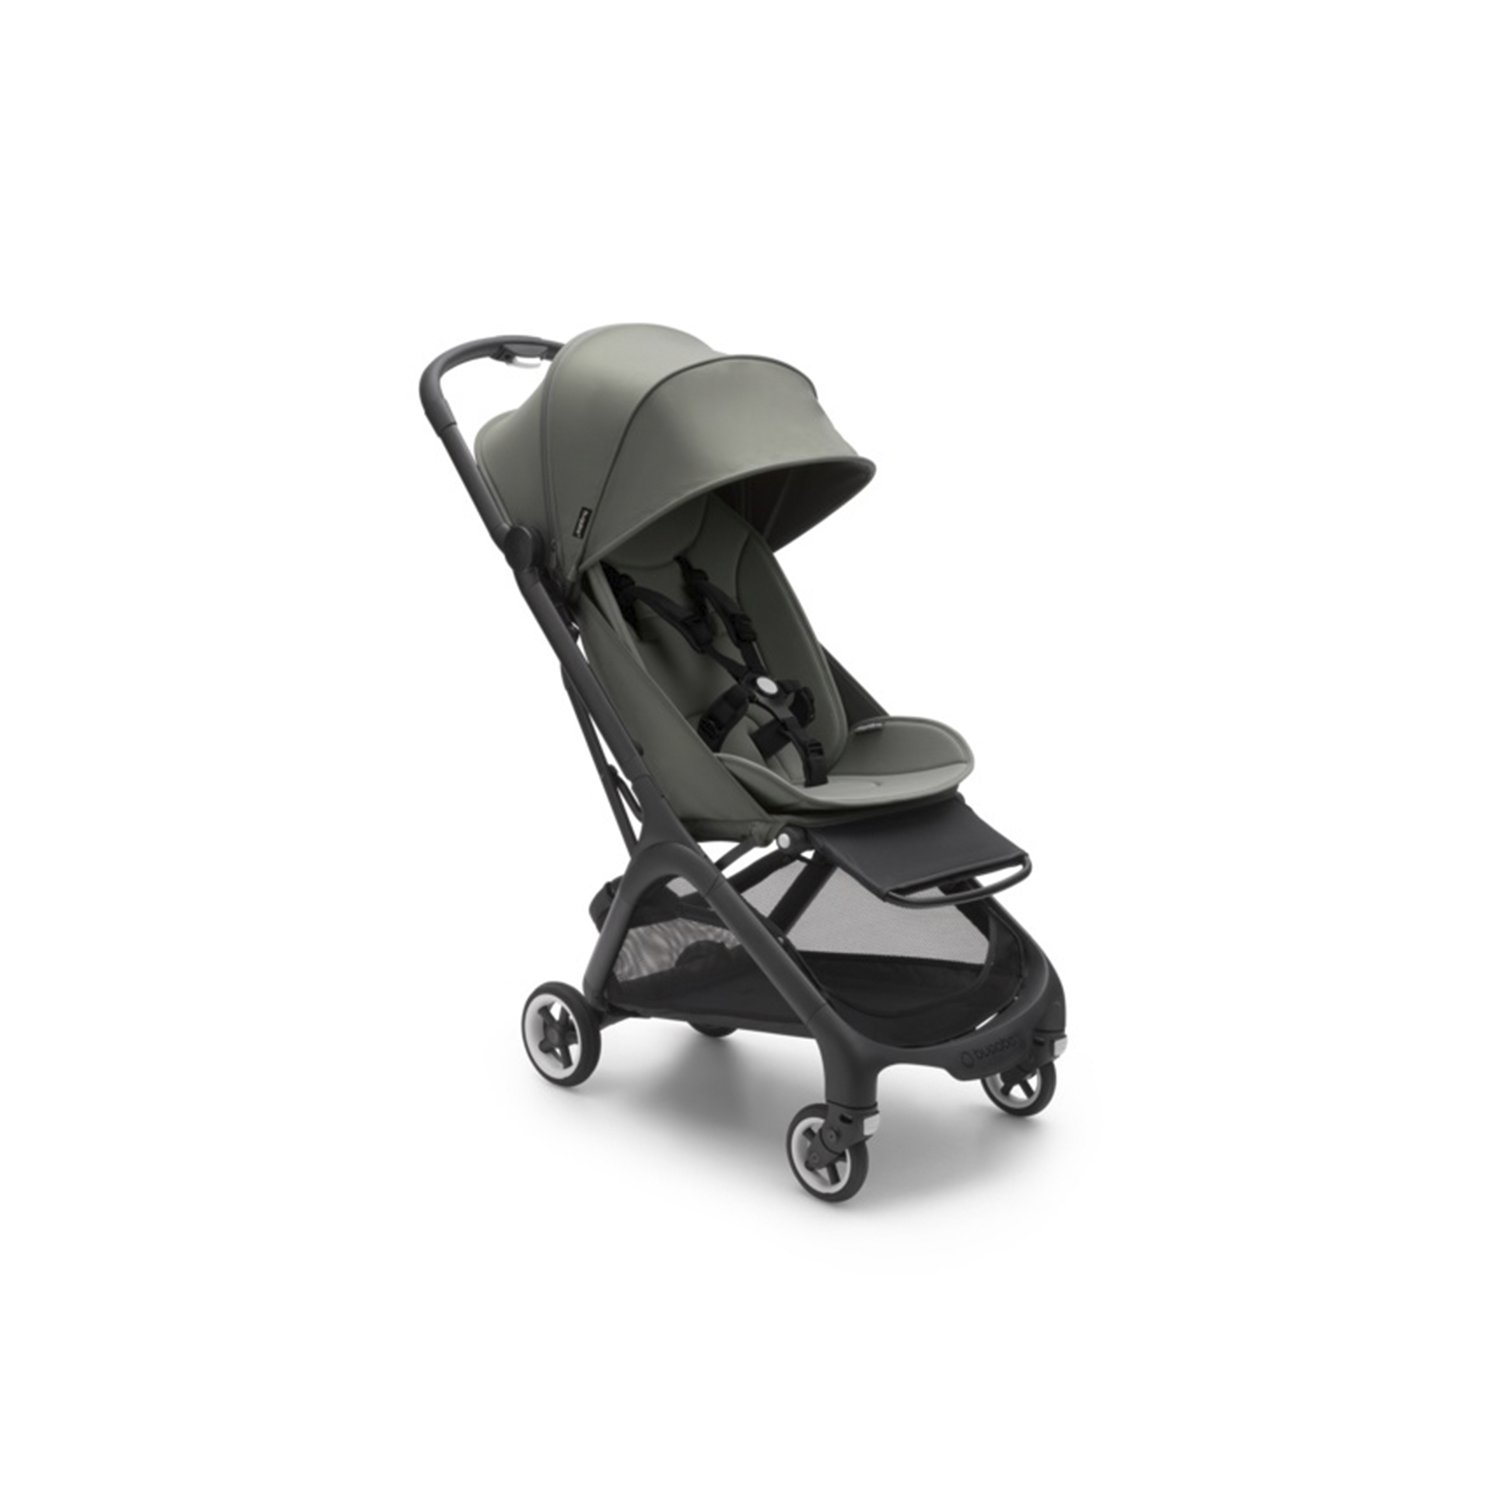 Bugaboo Butterfly, Forest Green. Bugaboo Bee 3 прогулочная. Bugaboo Butterfly цвета. Бугабу би 5 с люлькой. Коляска ping